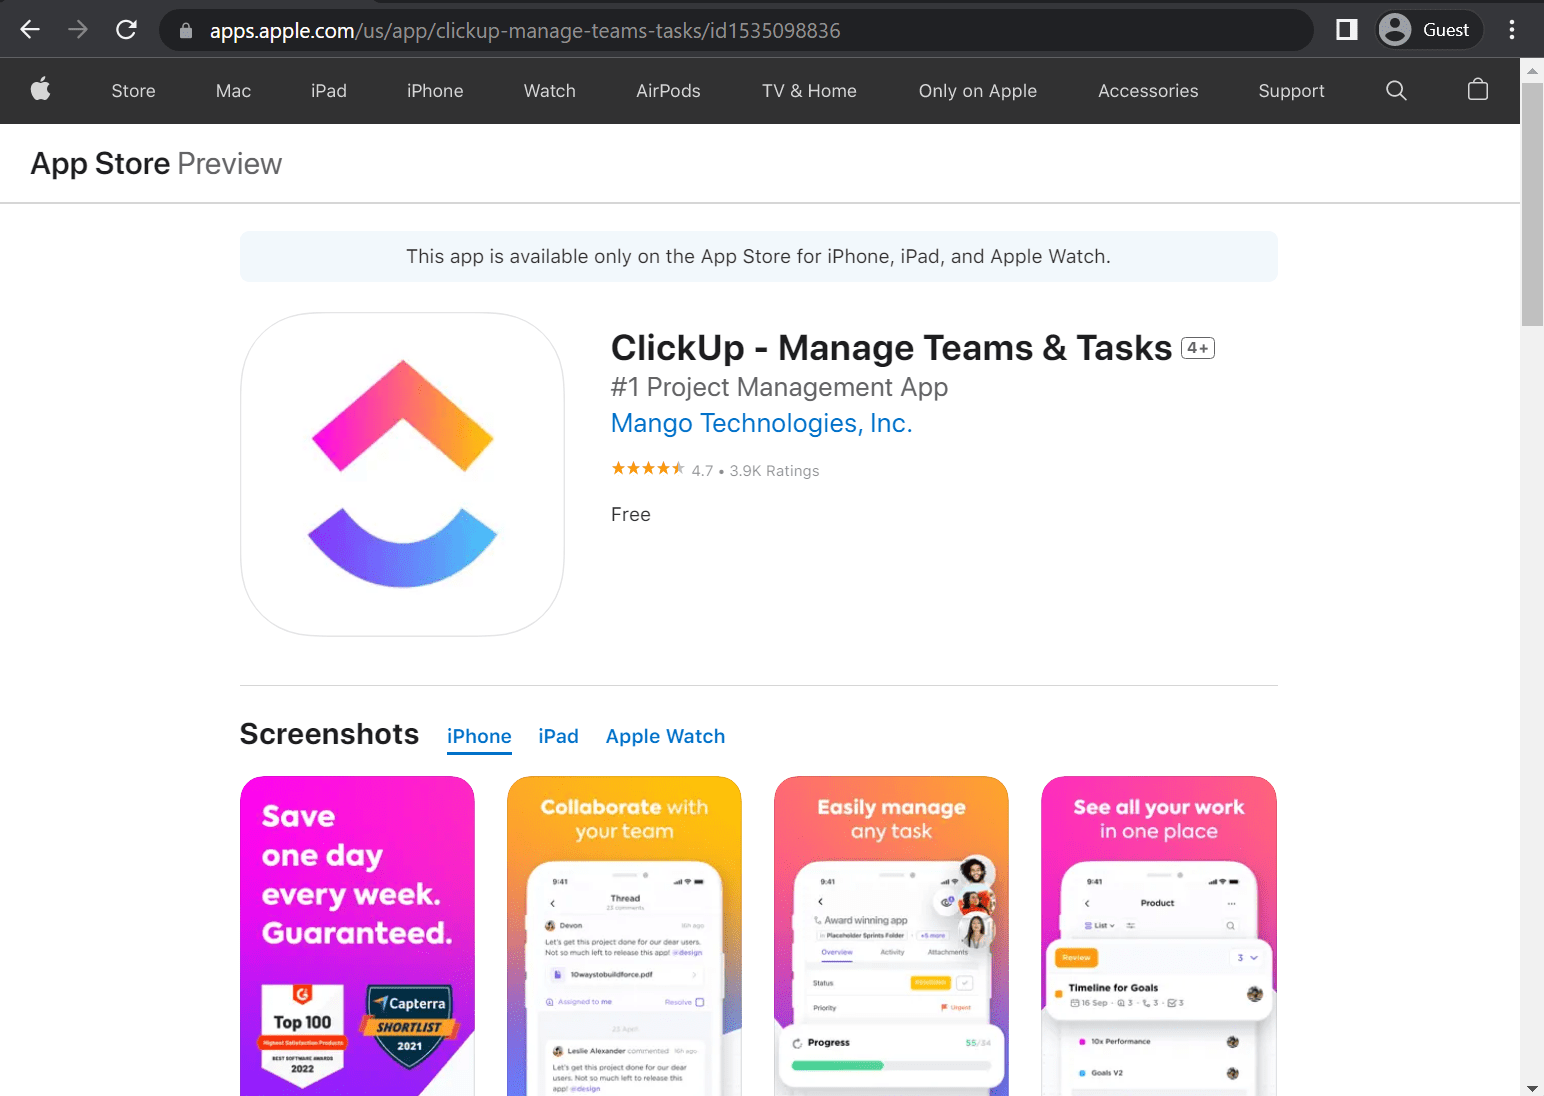 clickup app store page